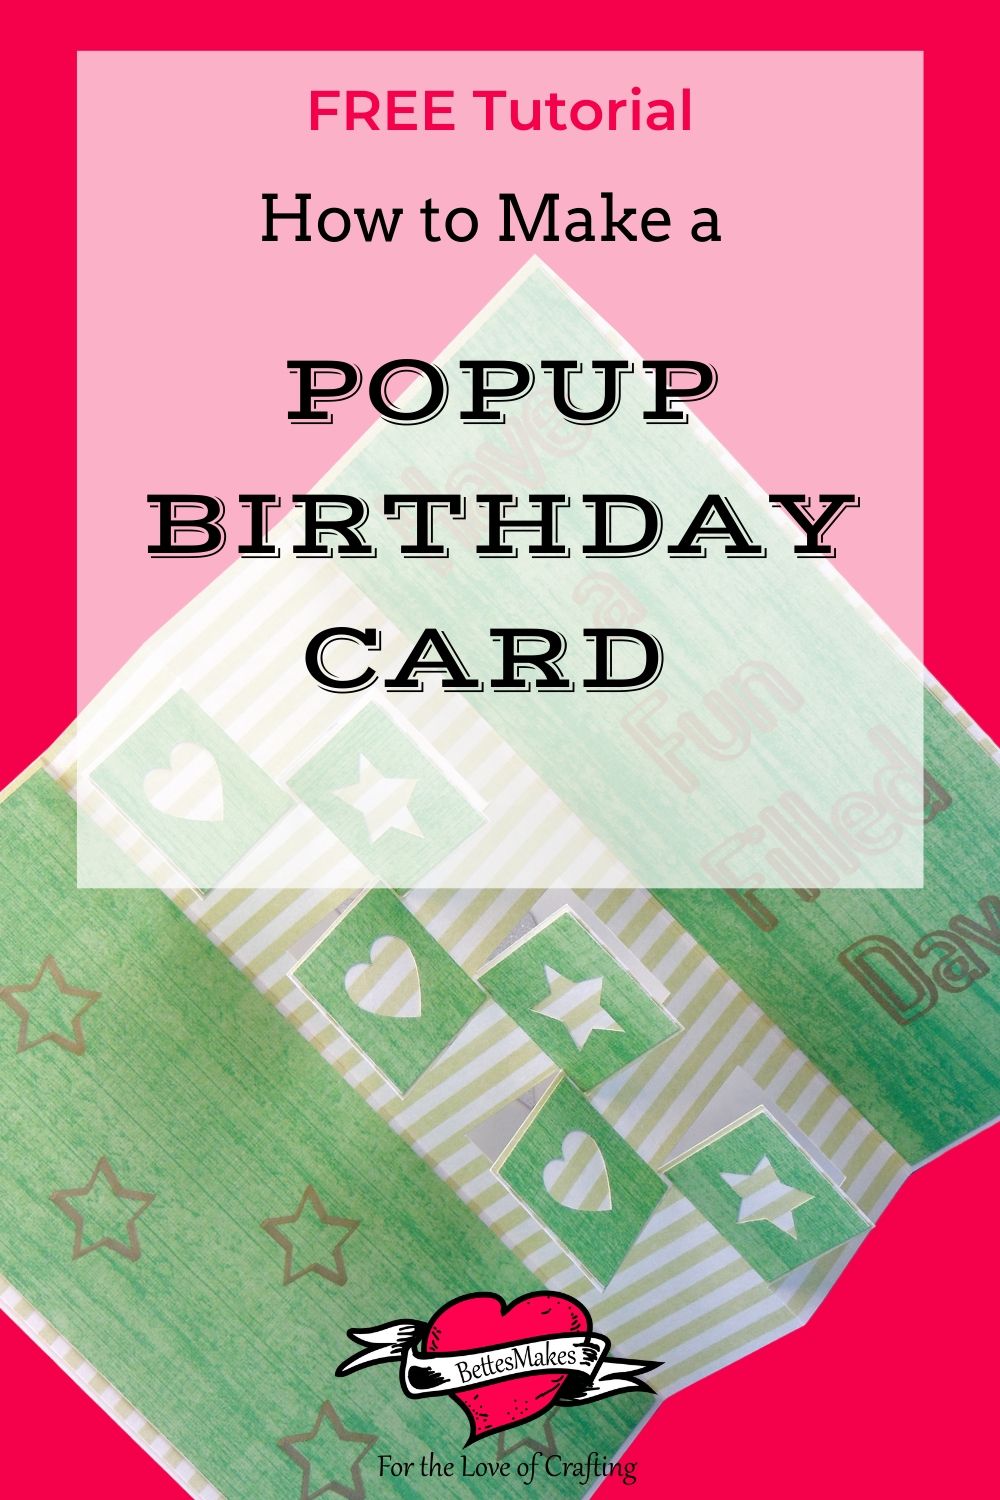 How to Make a Popup Birthday Card